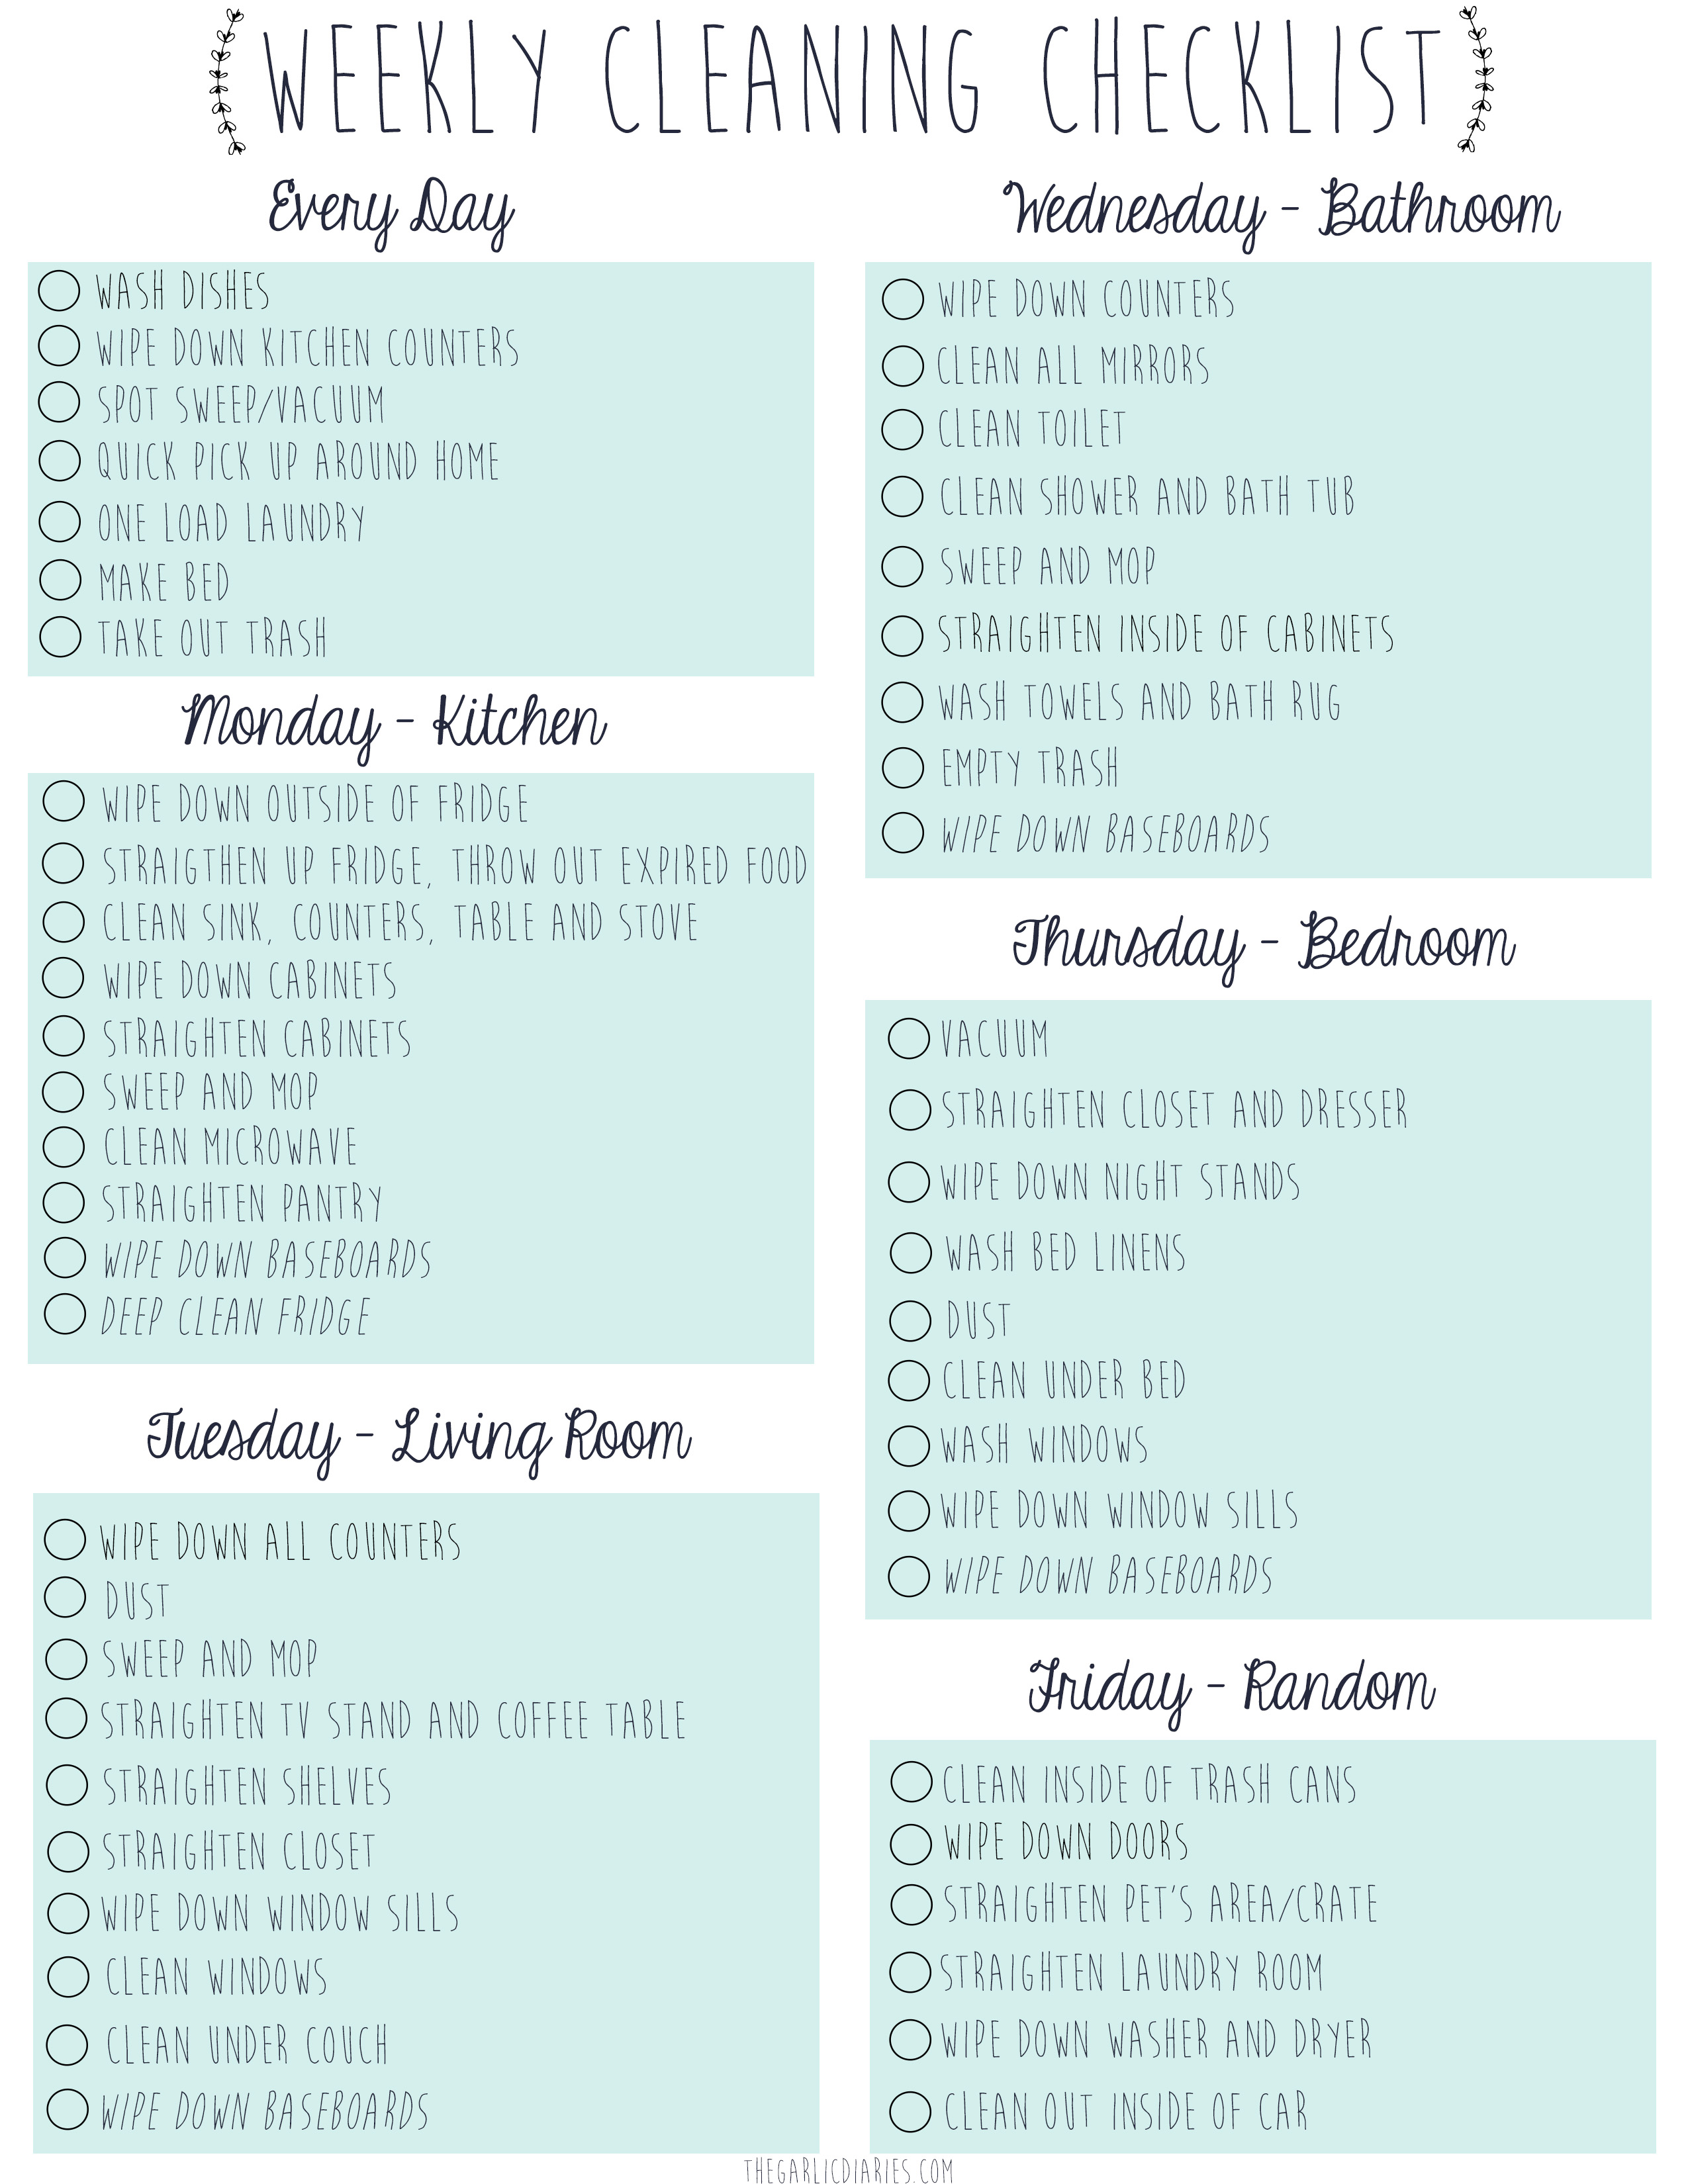 Daily Weekly Monthly Housekeeping Checklist